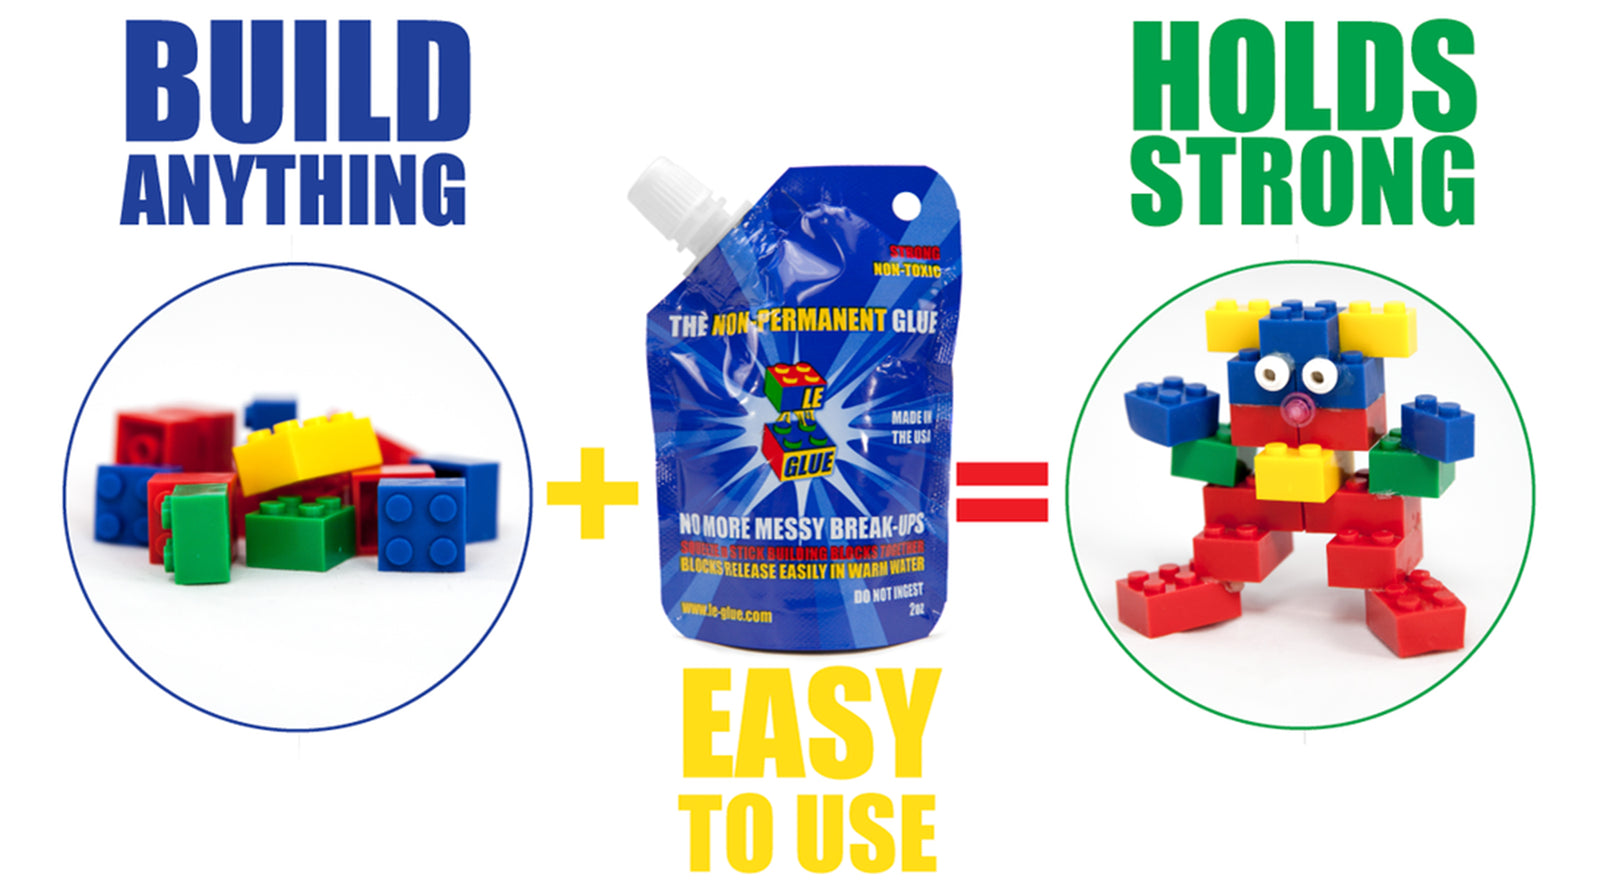 Le-Glue Non Permanent Water Glue for Lego - Kids Happy House